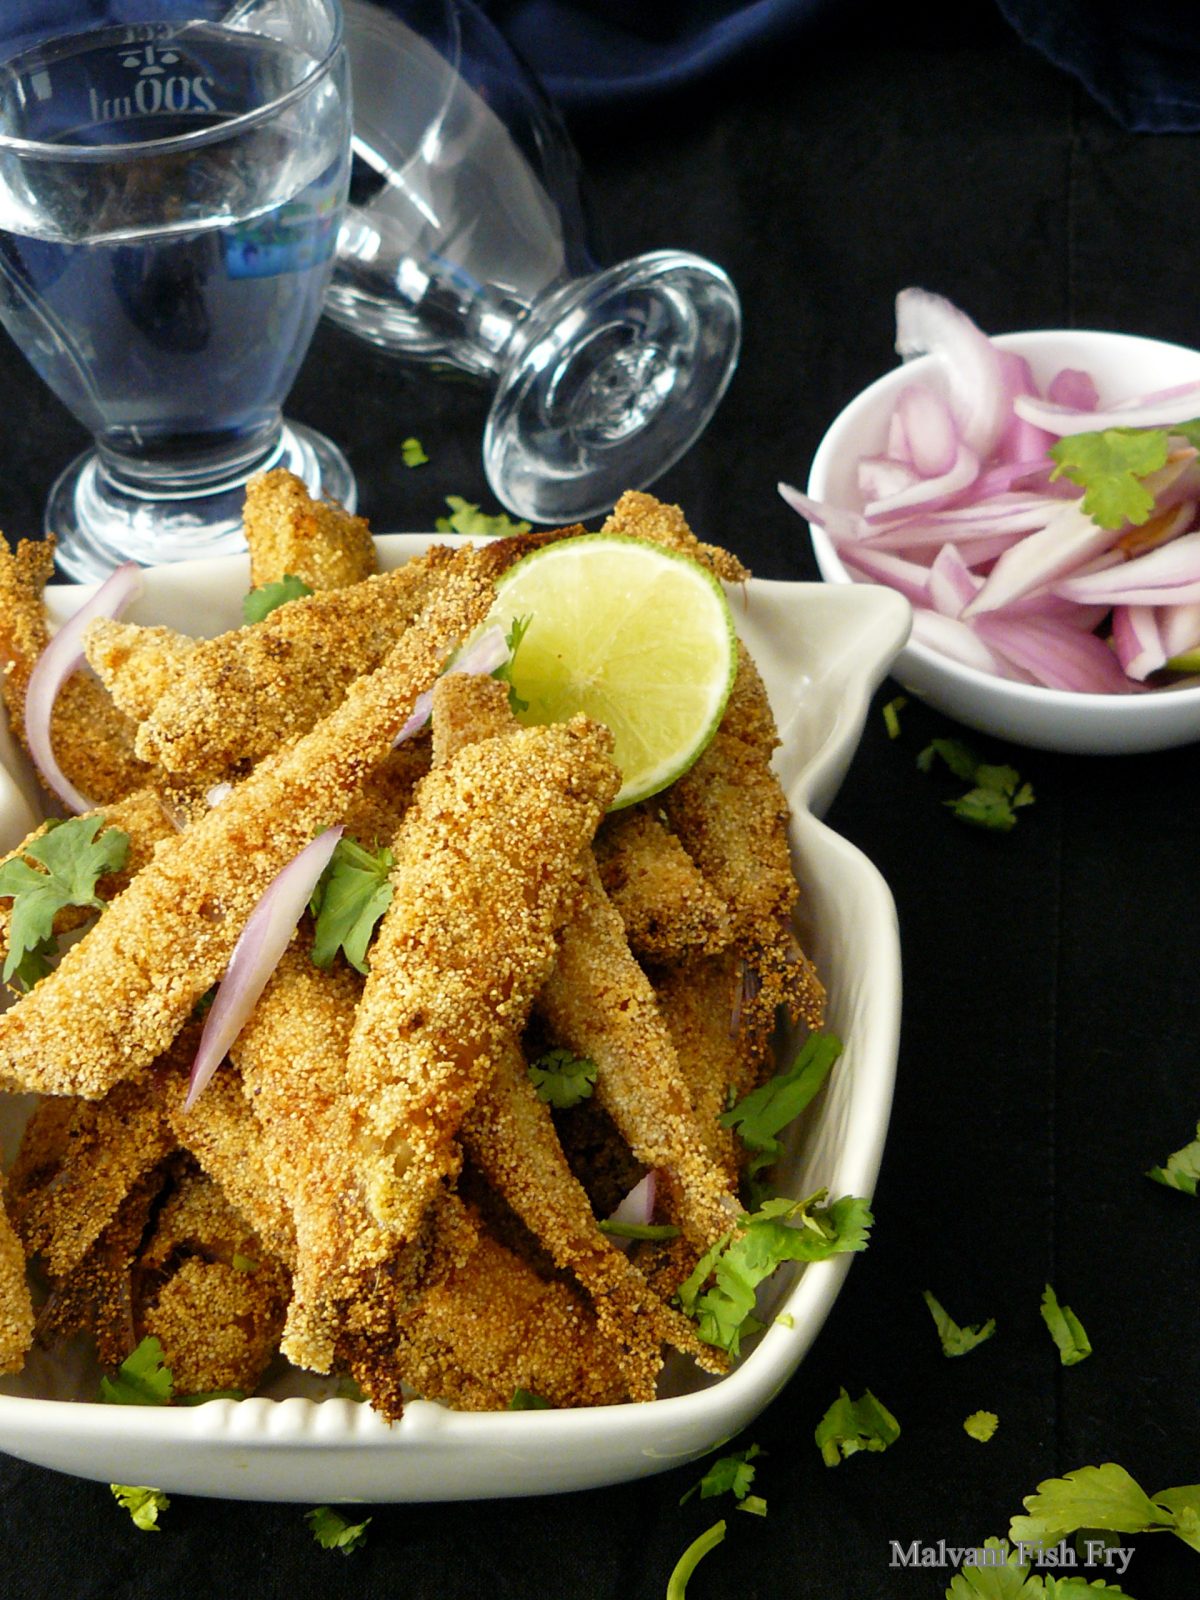 Malvani Fish Fry - a crunchy, mildly spiced fish fry from India - thespiceadventuress.com